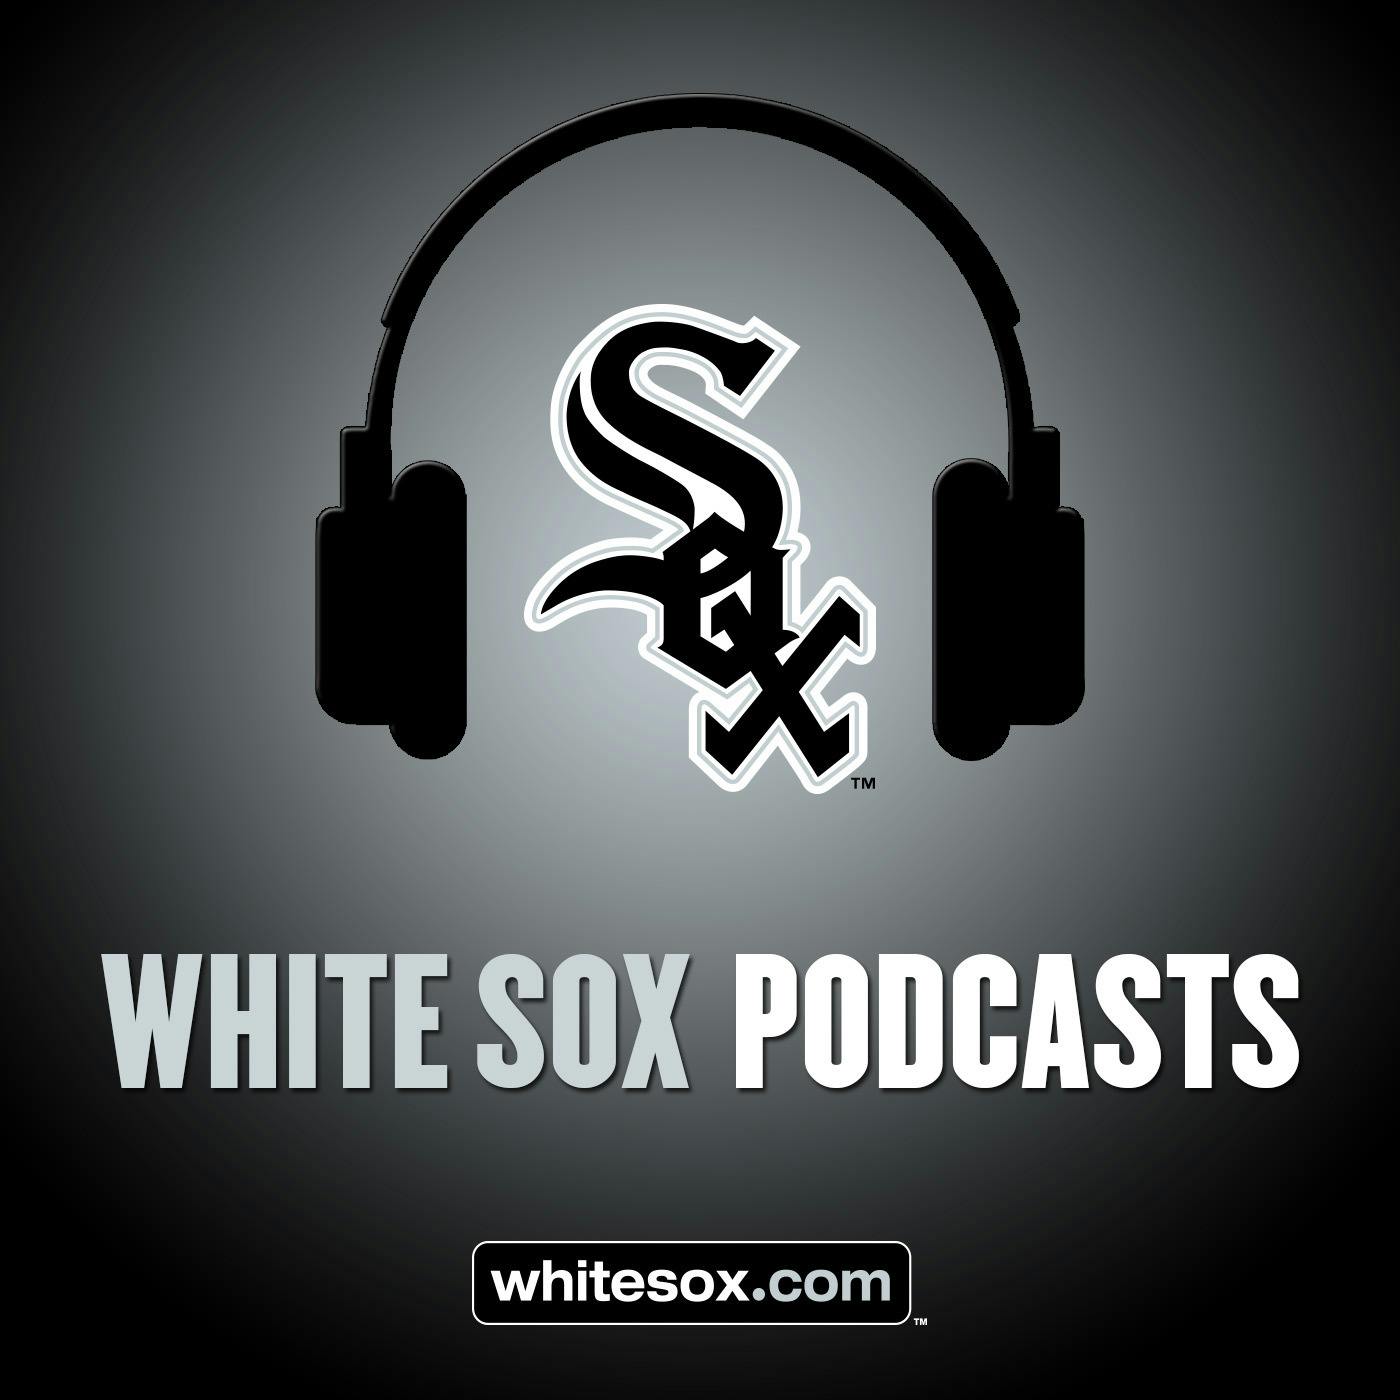 12/15/18: White Sox Weekly